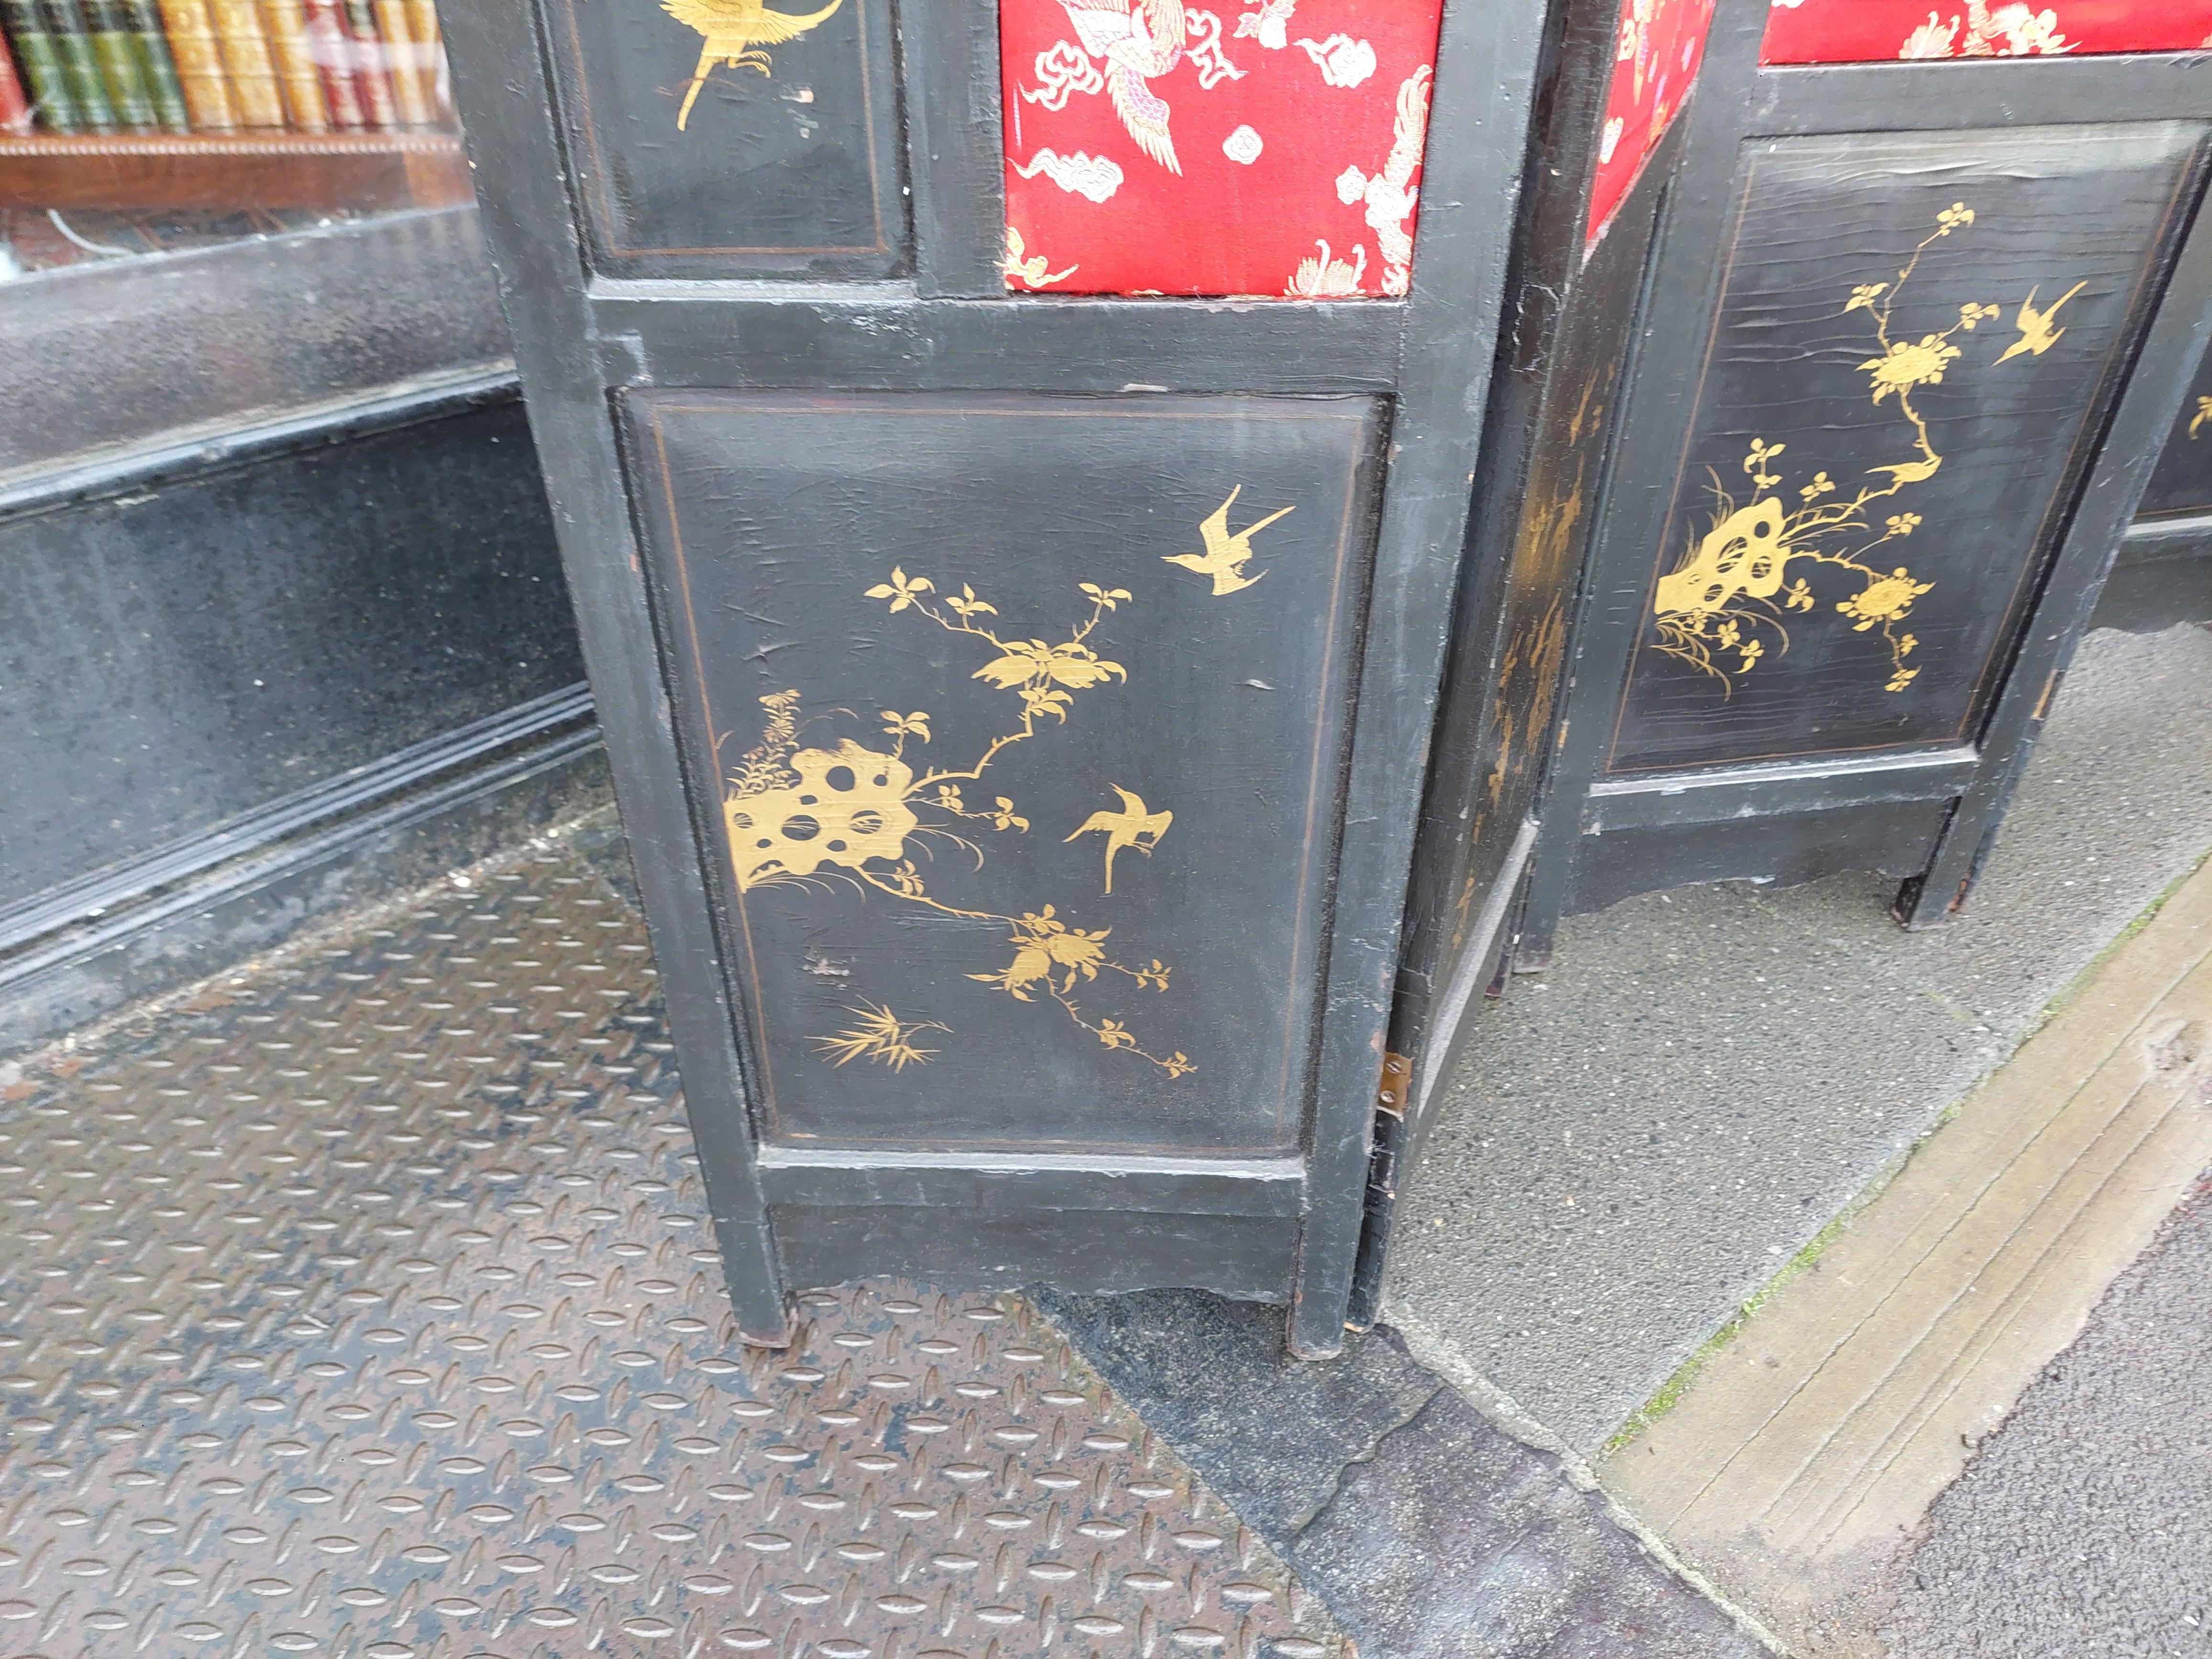 Regency Chinese Imported Lacquered 8 Fold Dressing Screen im Zustand „Gut“ im Angebot in Altrincham, GB